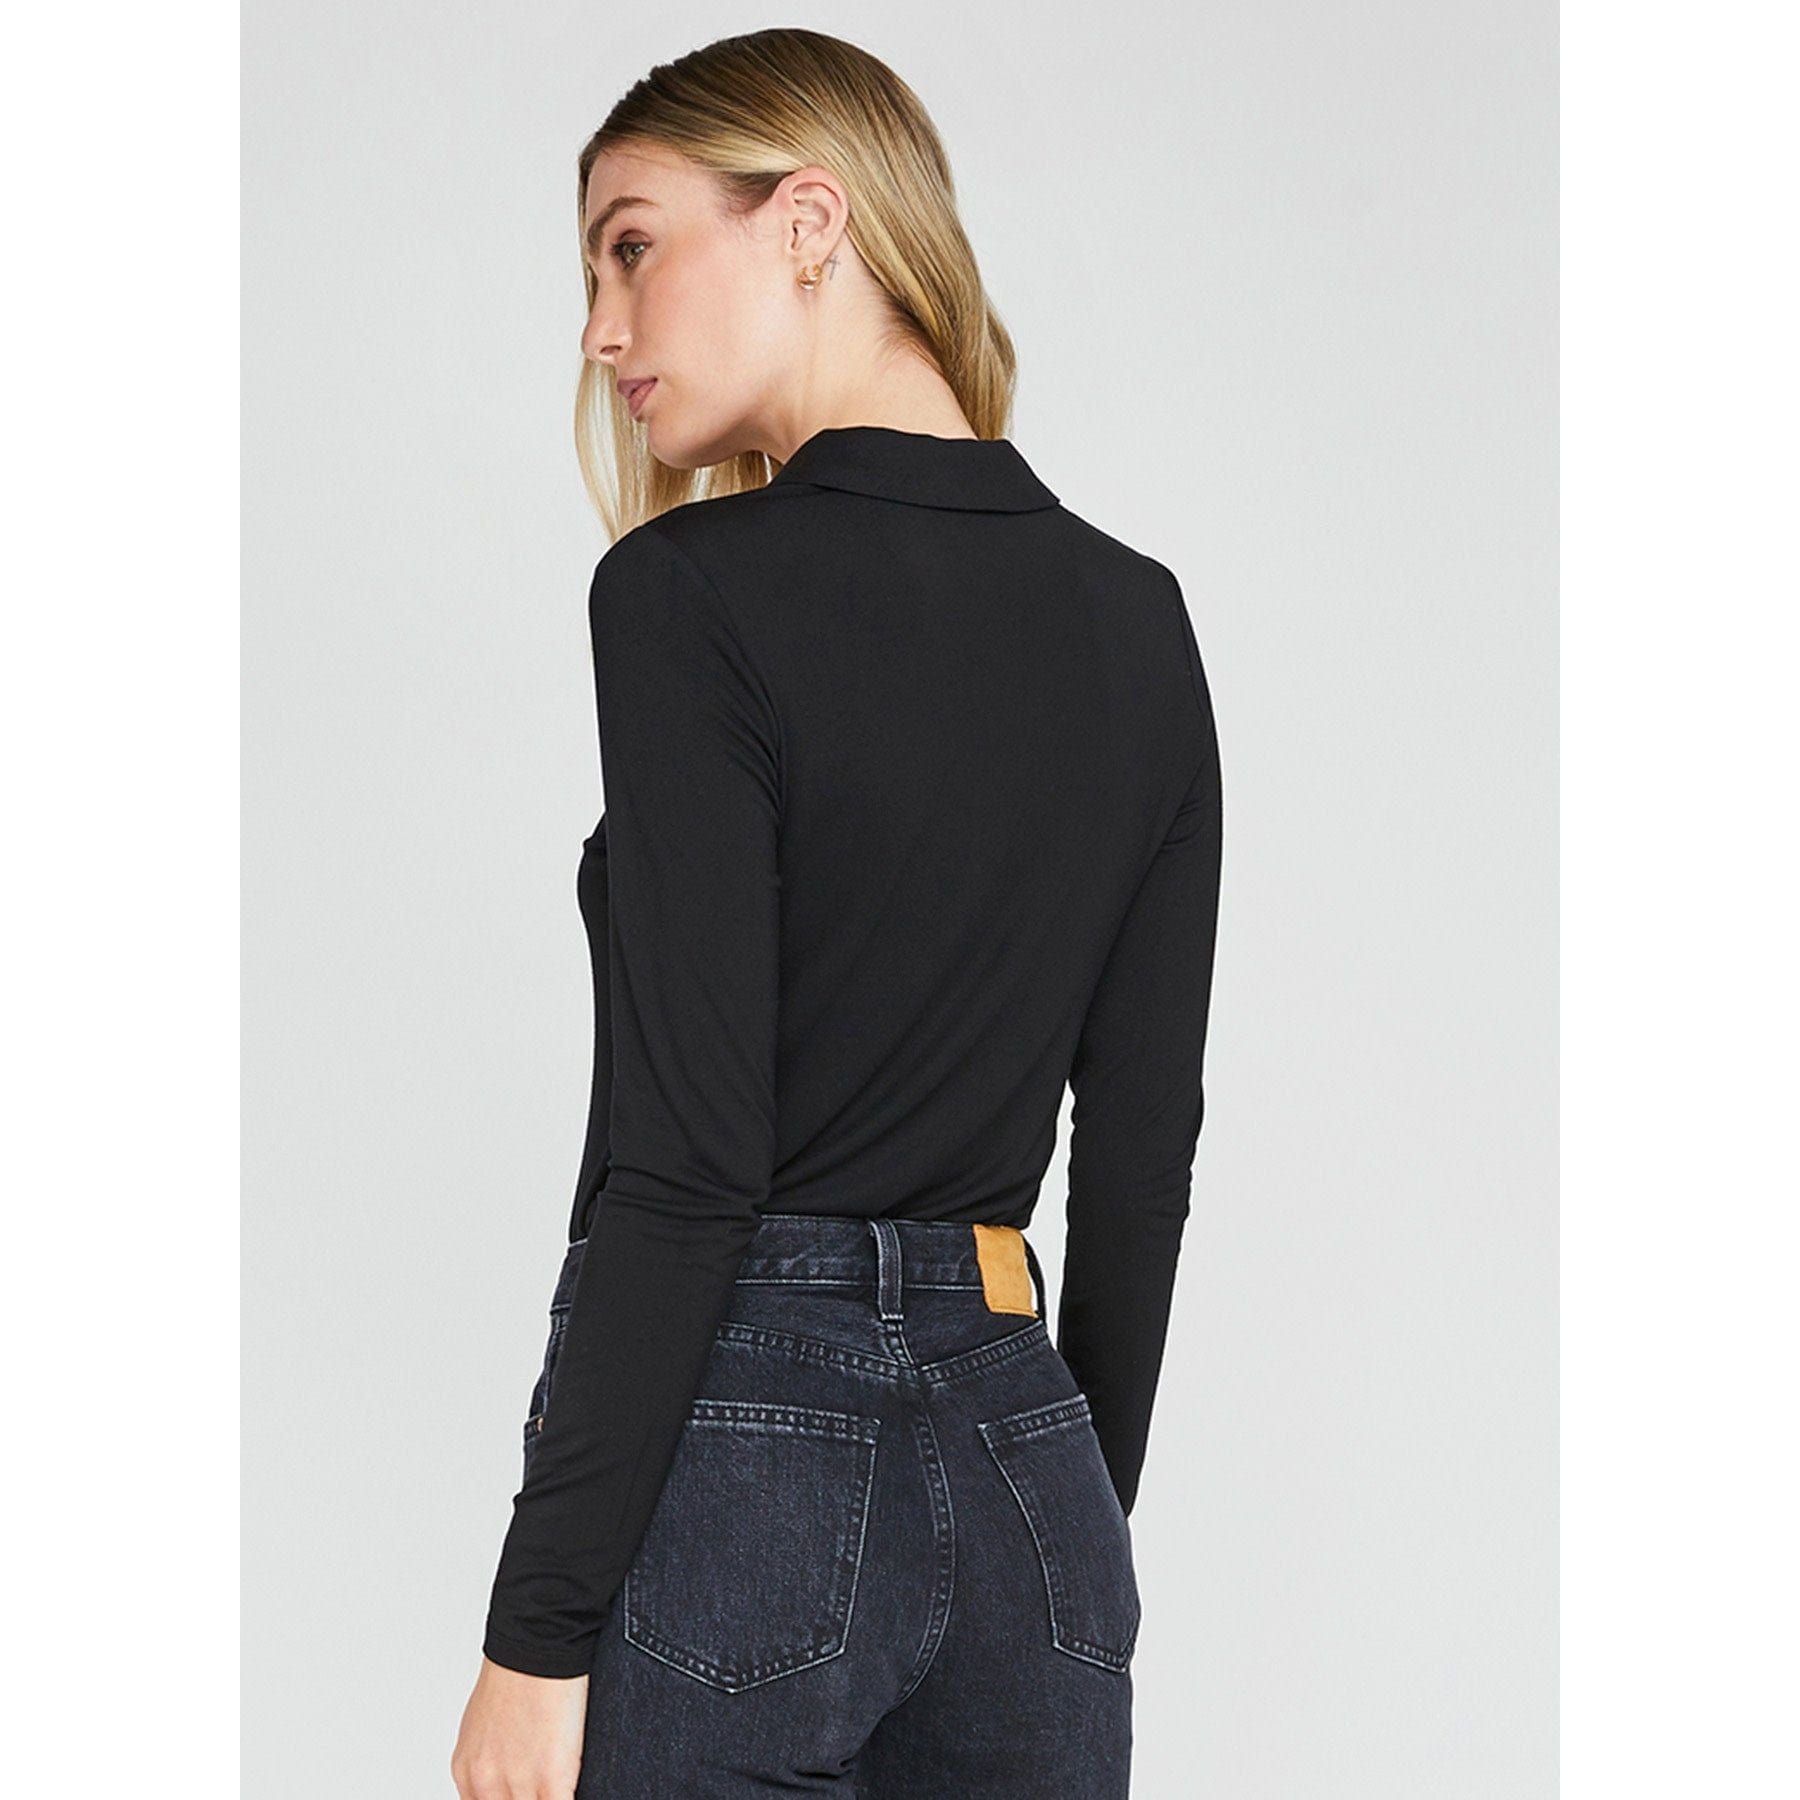 Gentle Fawn Black / XS Gentle Fawn Cannon Top